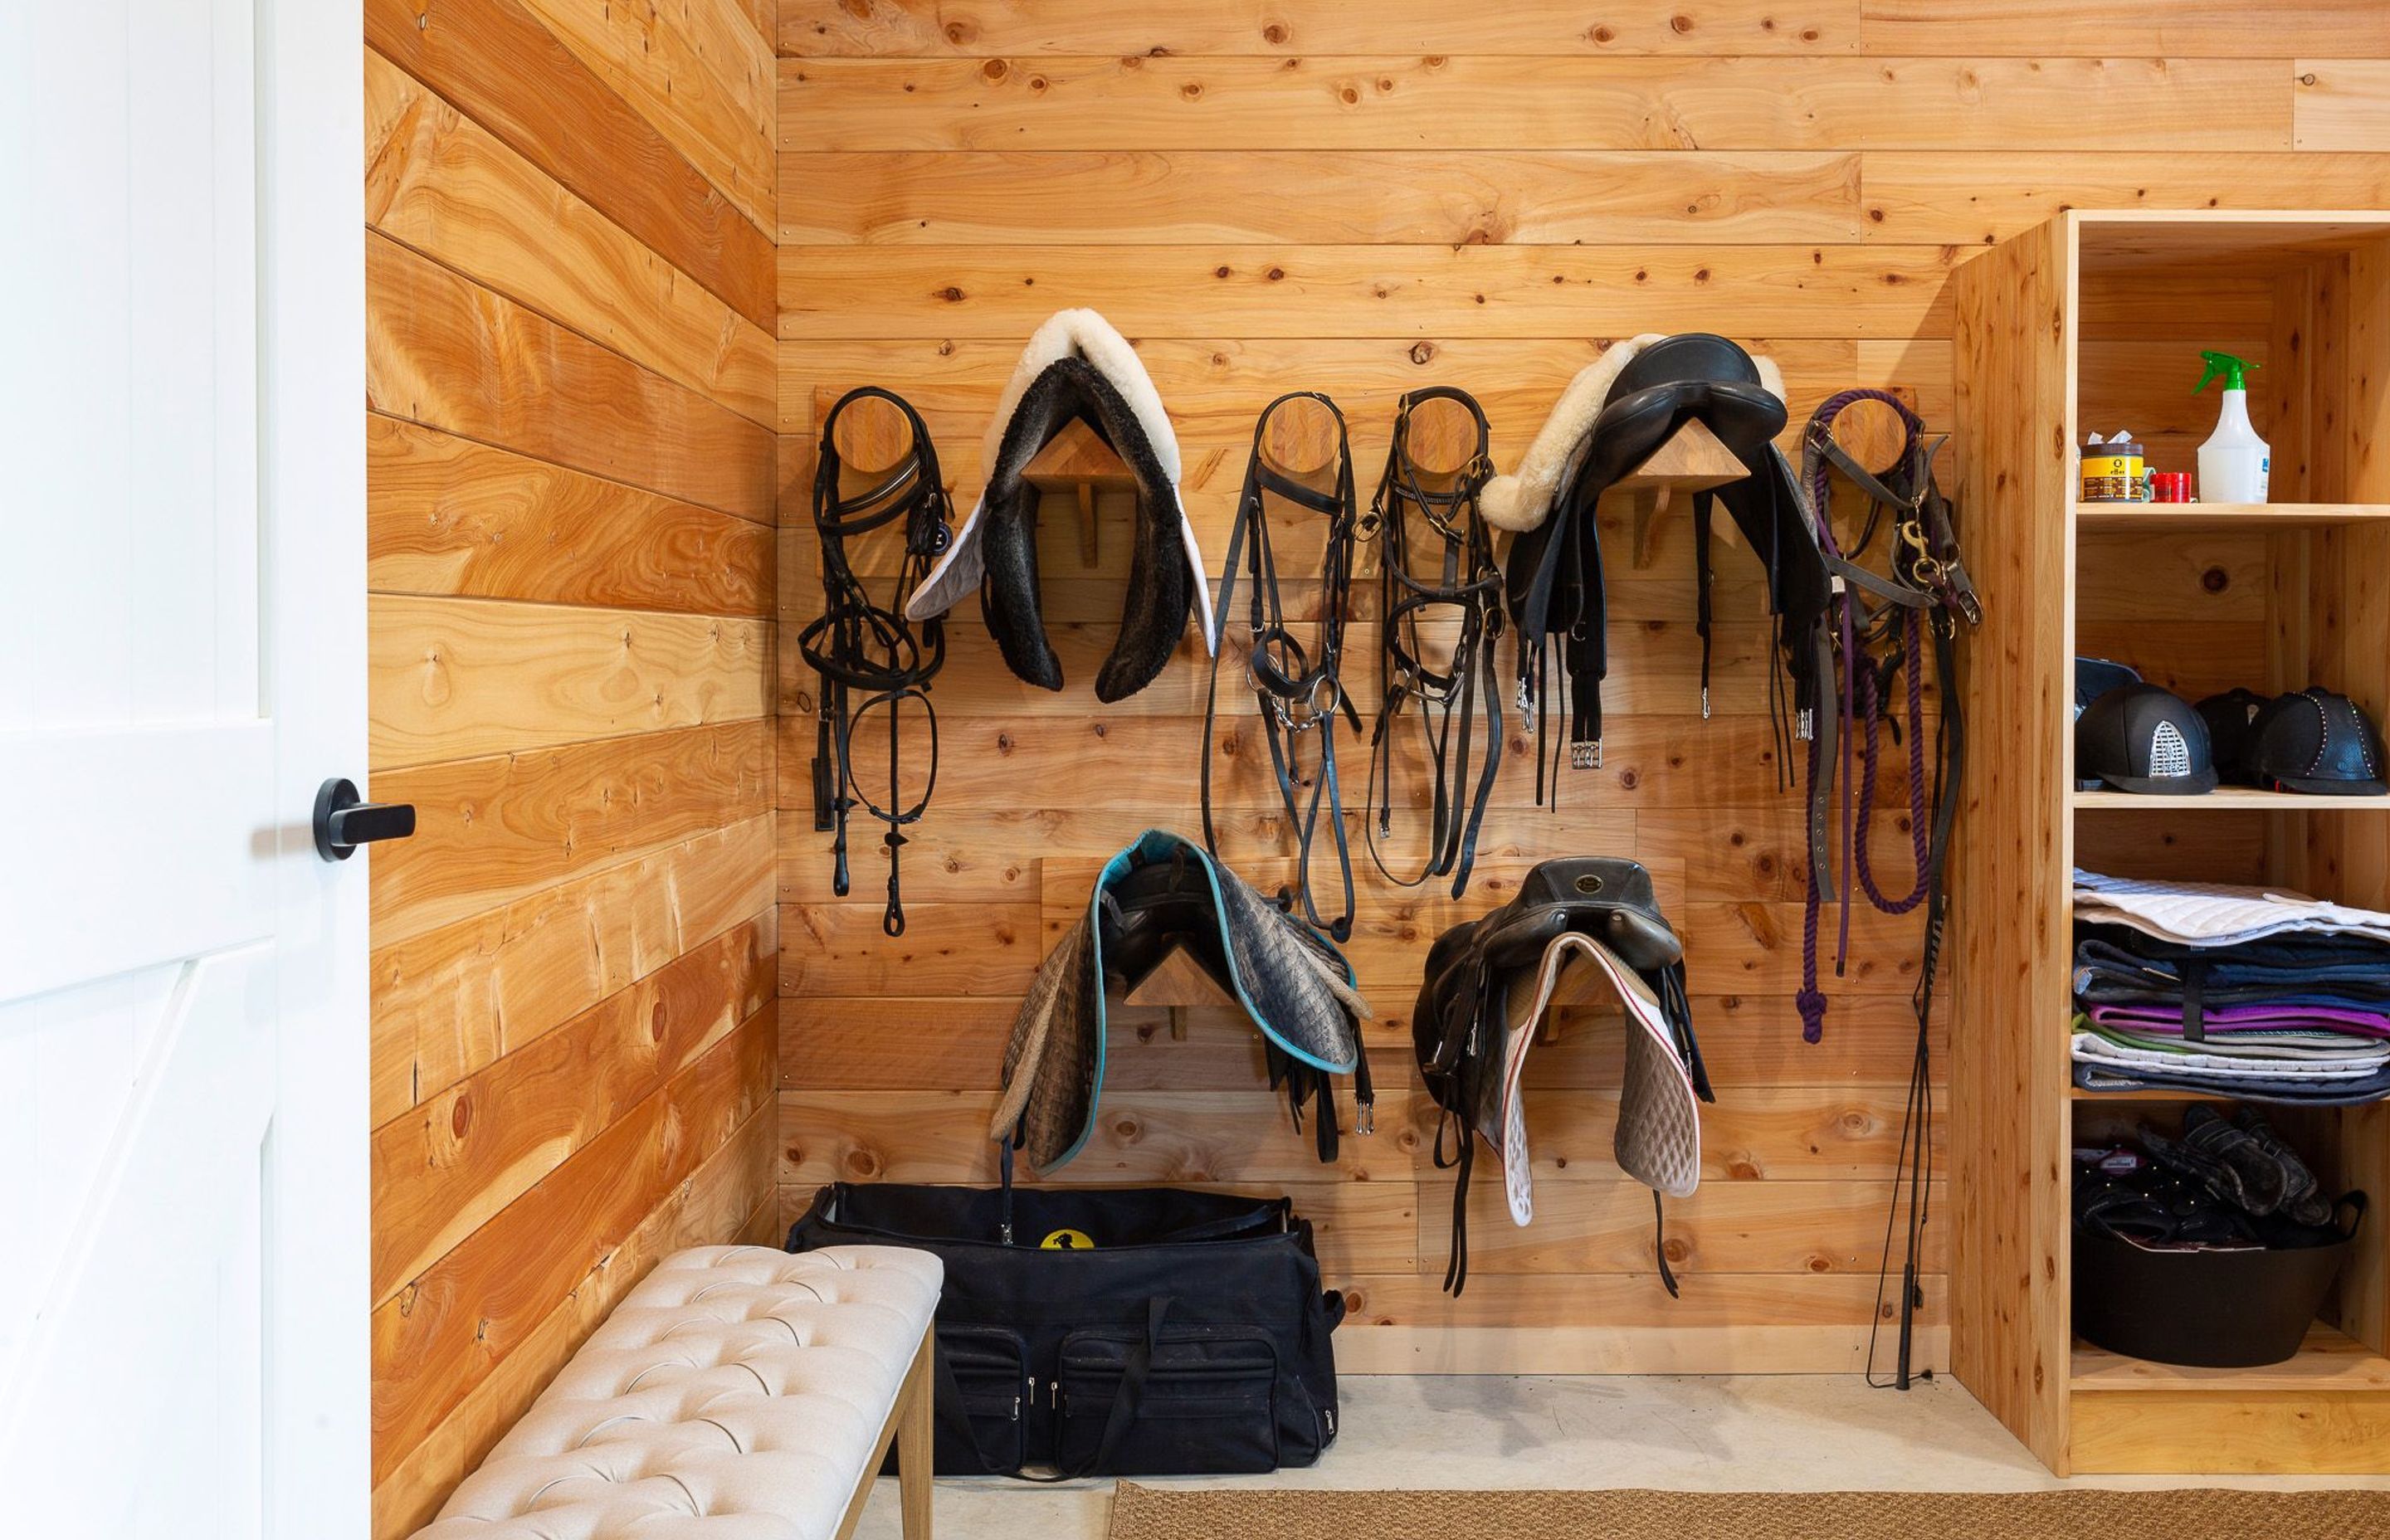 The separate tack room features custom made joinery for housing specialist equestrine gear. 